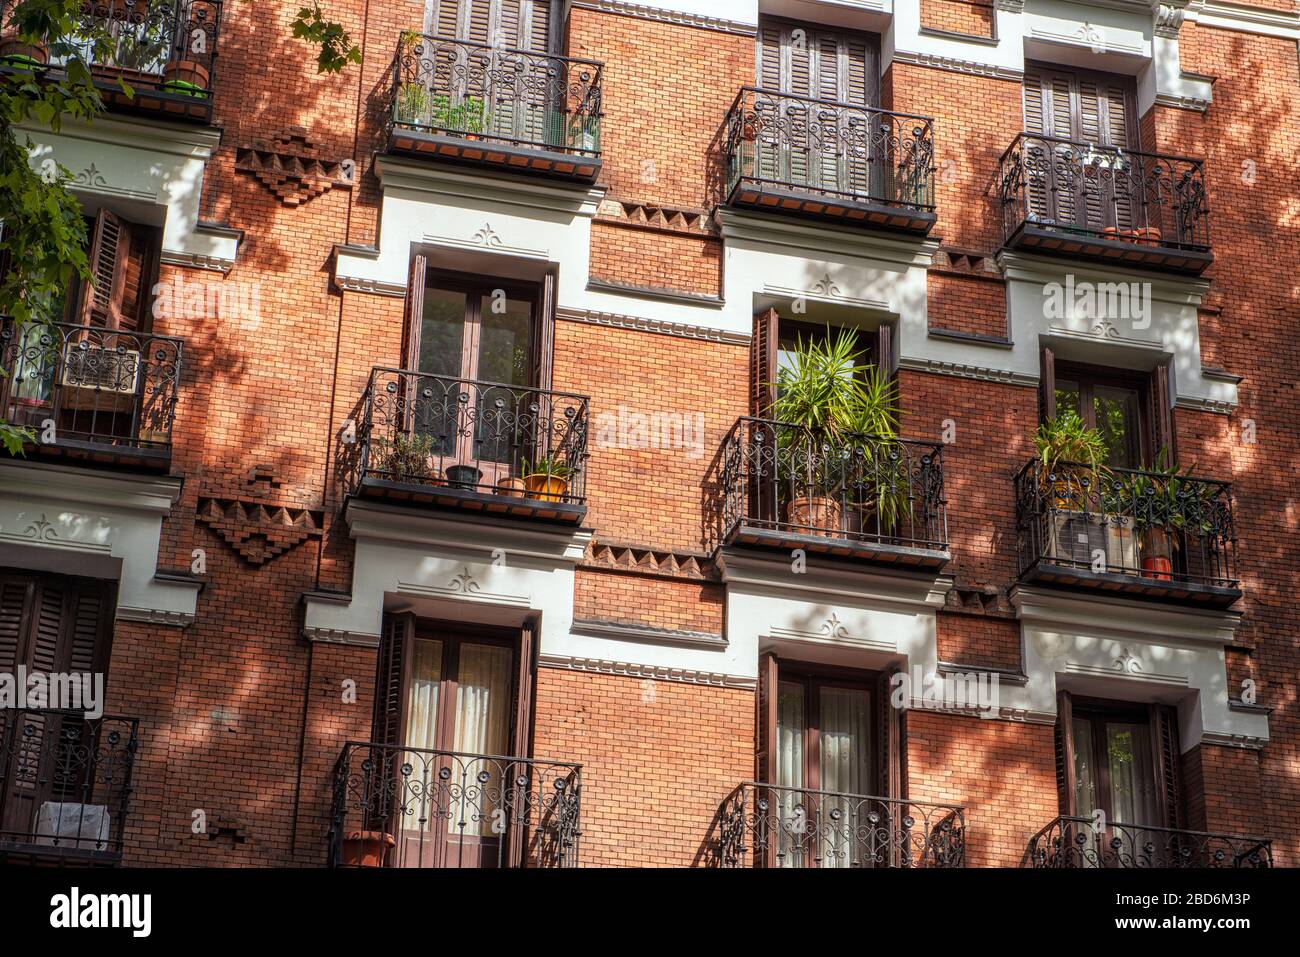 Looking up at elegant shuttered balconies on the side of a red-brick period building Stock Photo